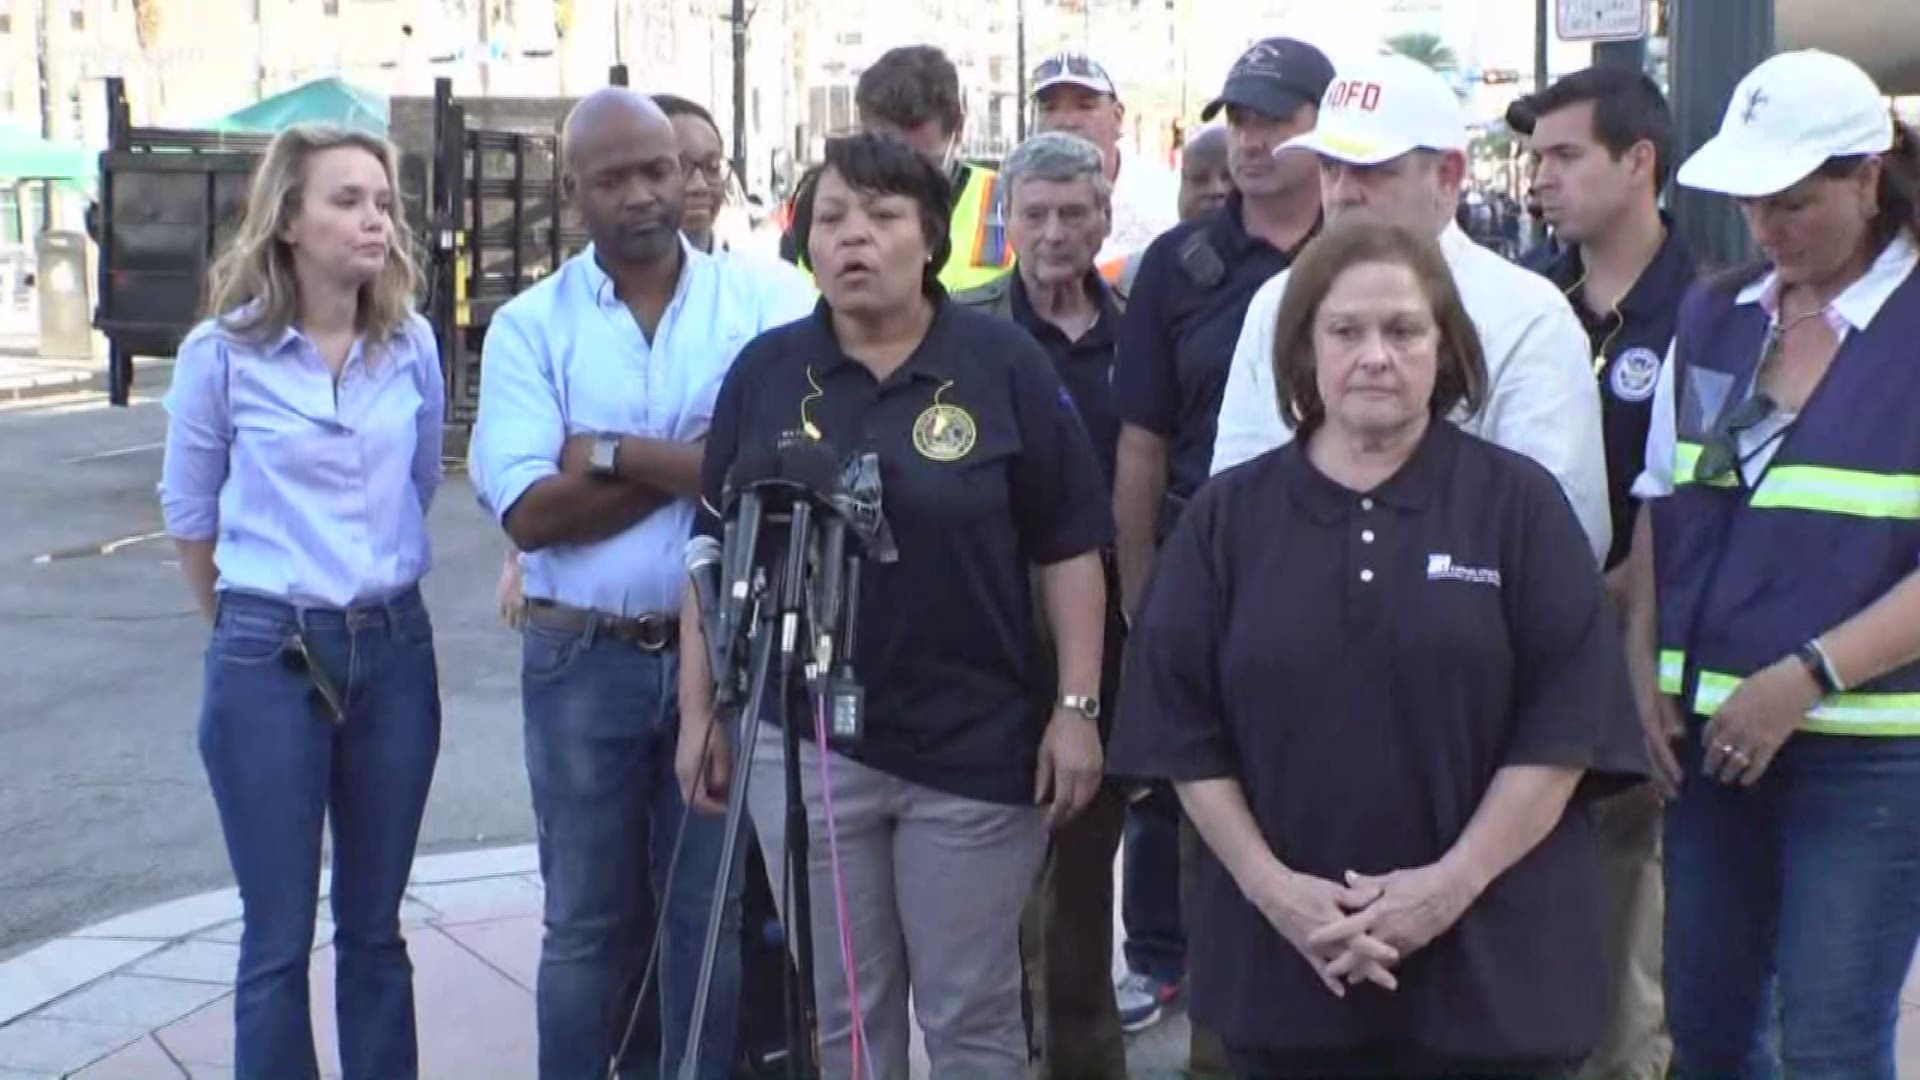 "That's what it's about now, recovering our people who are still in that building," New Orleans Mayor LaToya Cantrell said.